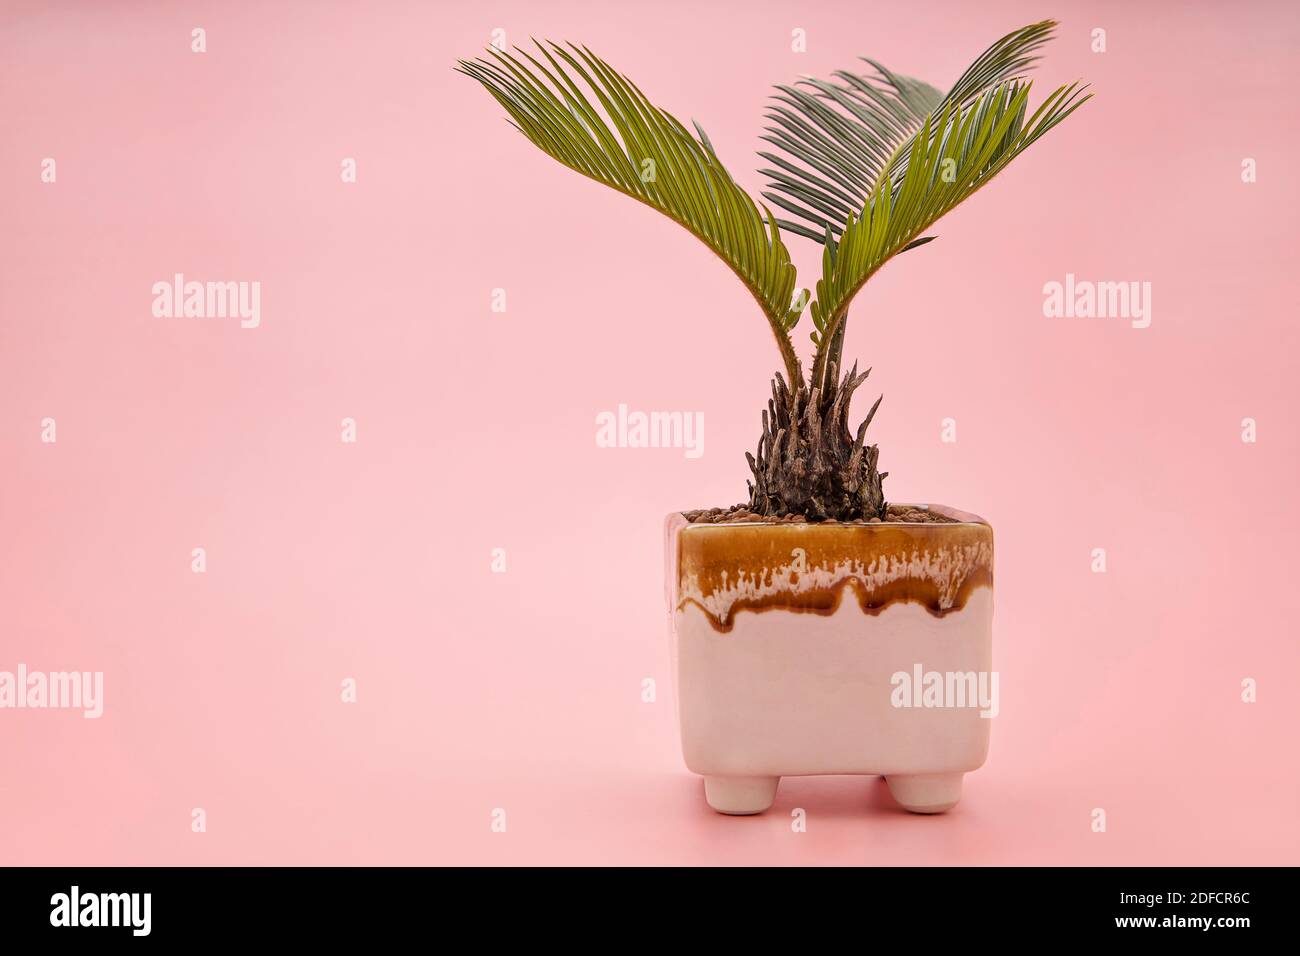 Dwarf cycads in white ceramic pots on a pink background. Stock Photo